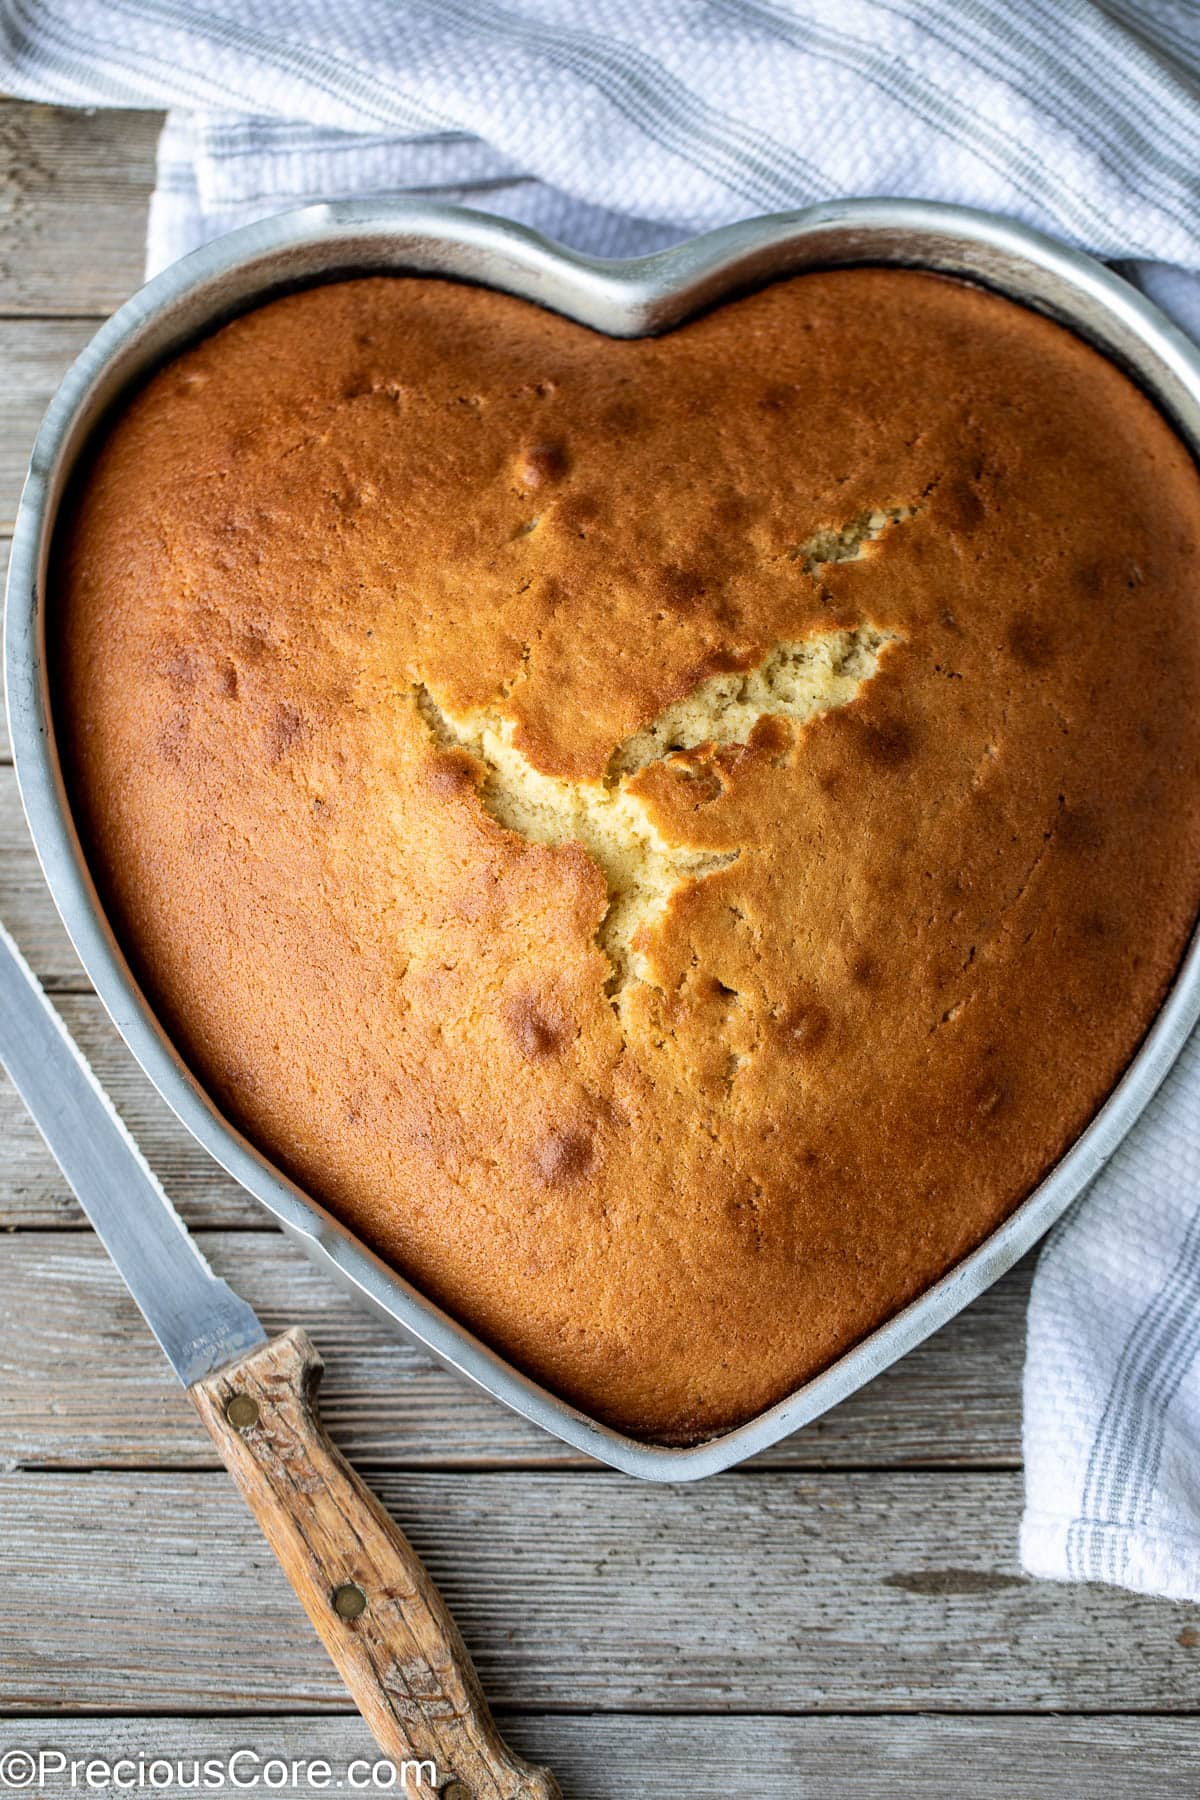 Plain cake in a heart-shaped pan with a knife on the side.